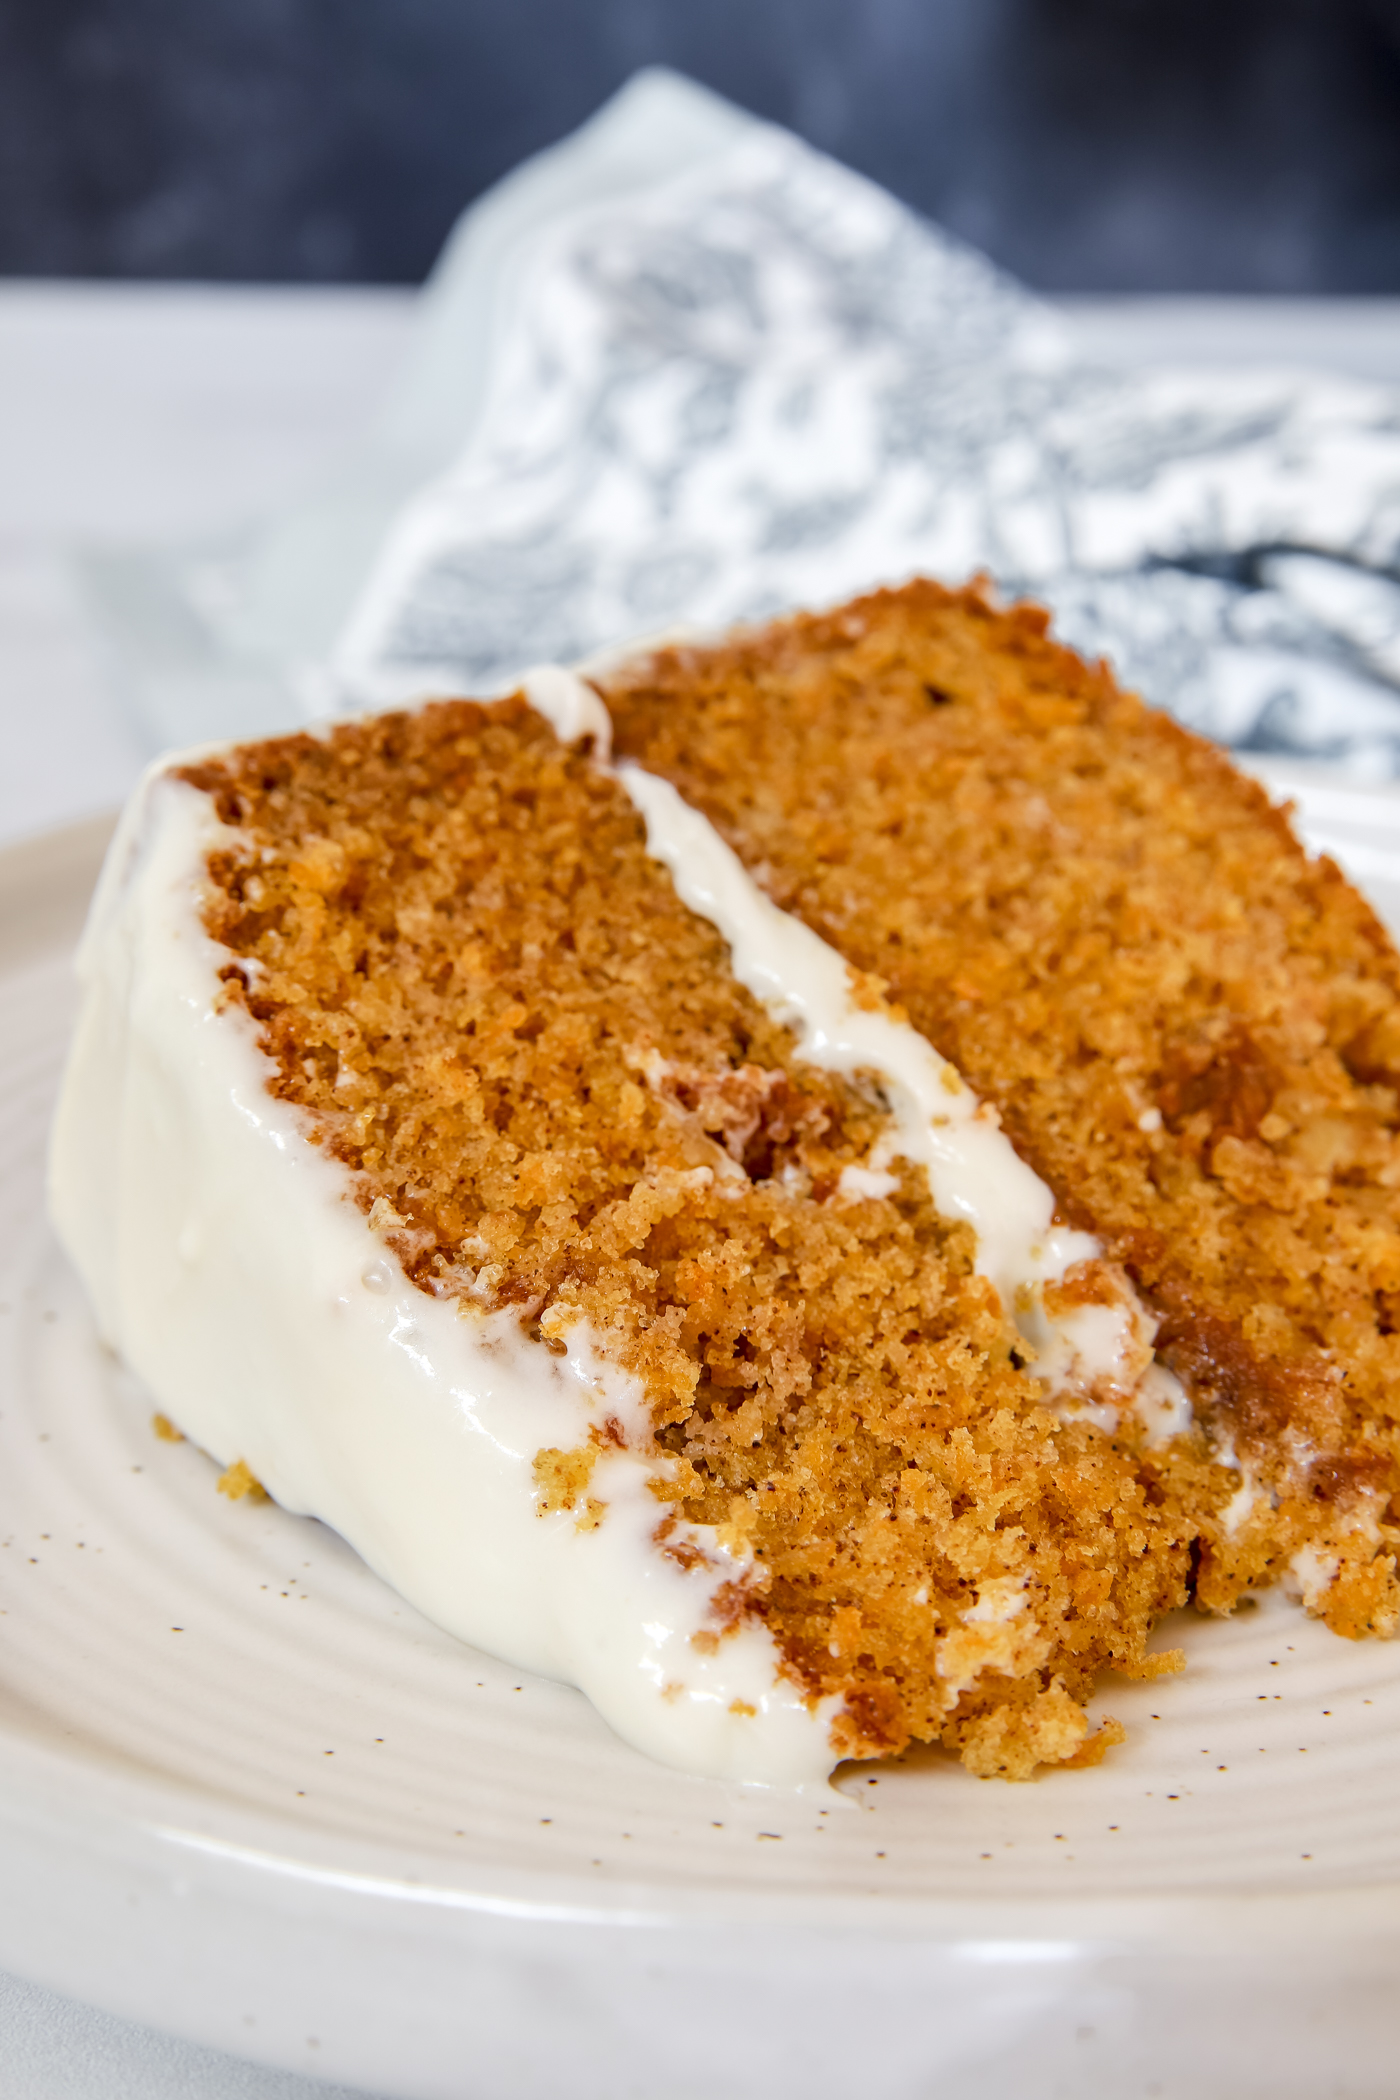 Small Carrot Cake with Cinnamon Whipped Cream Frosting! – Corrigan Sisters